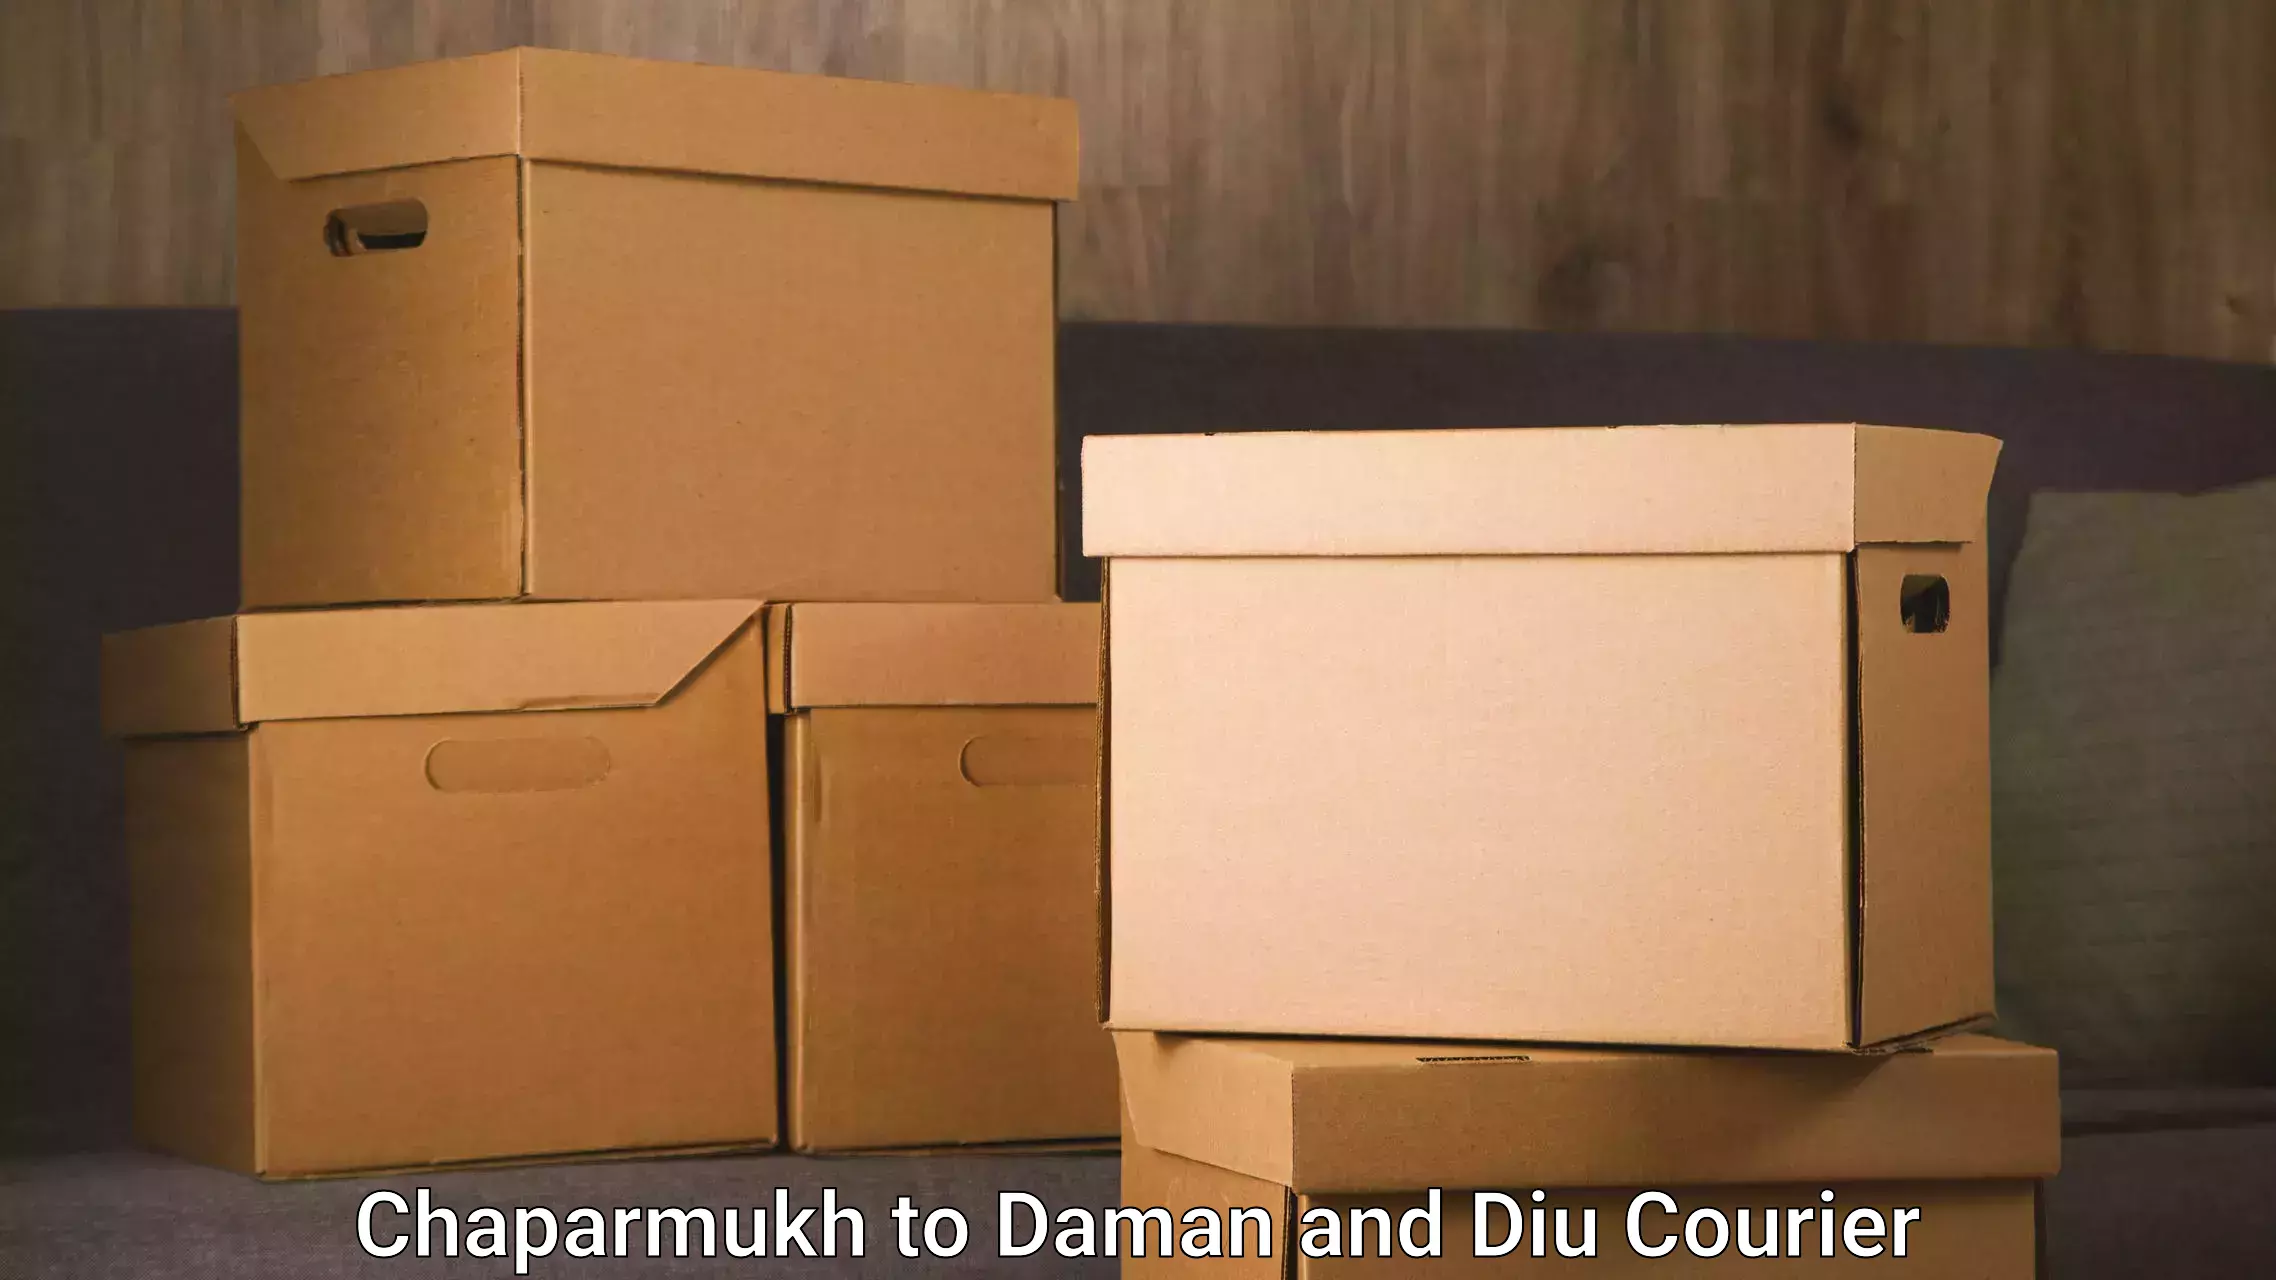 Local delivery service Chaparmukh to Diu